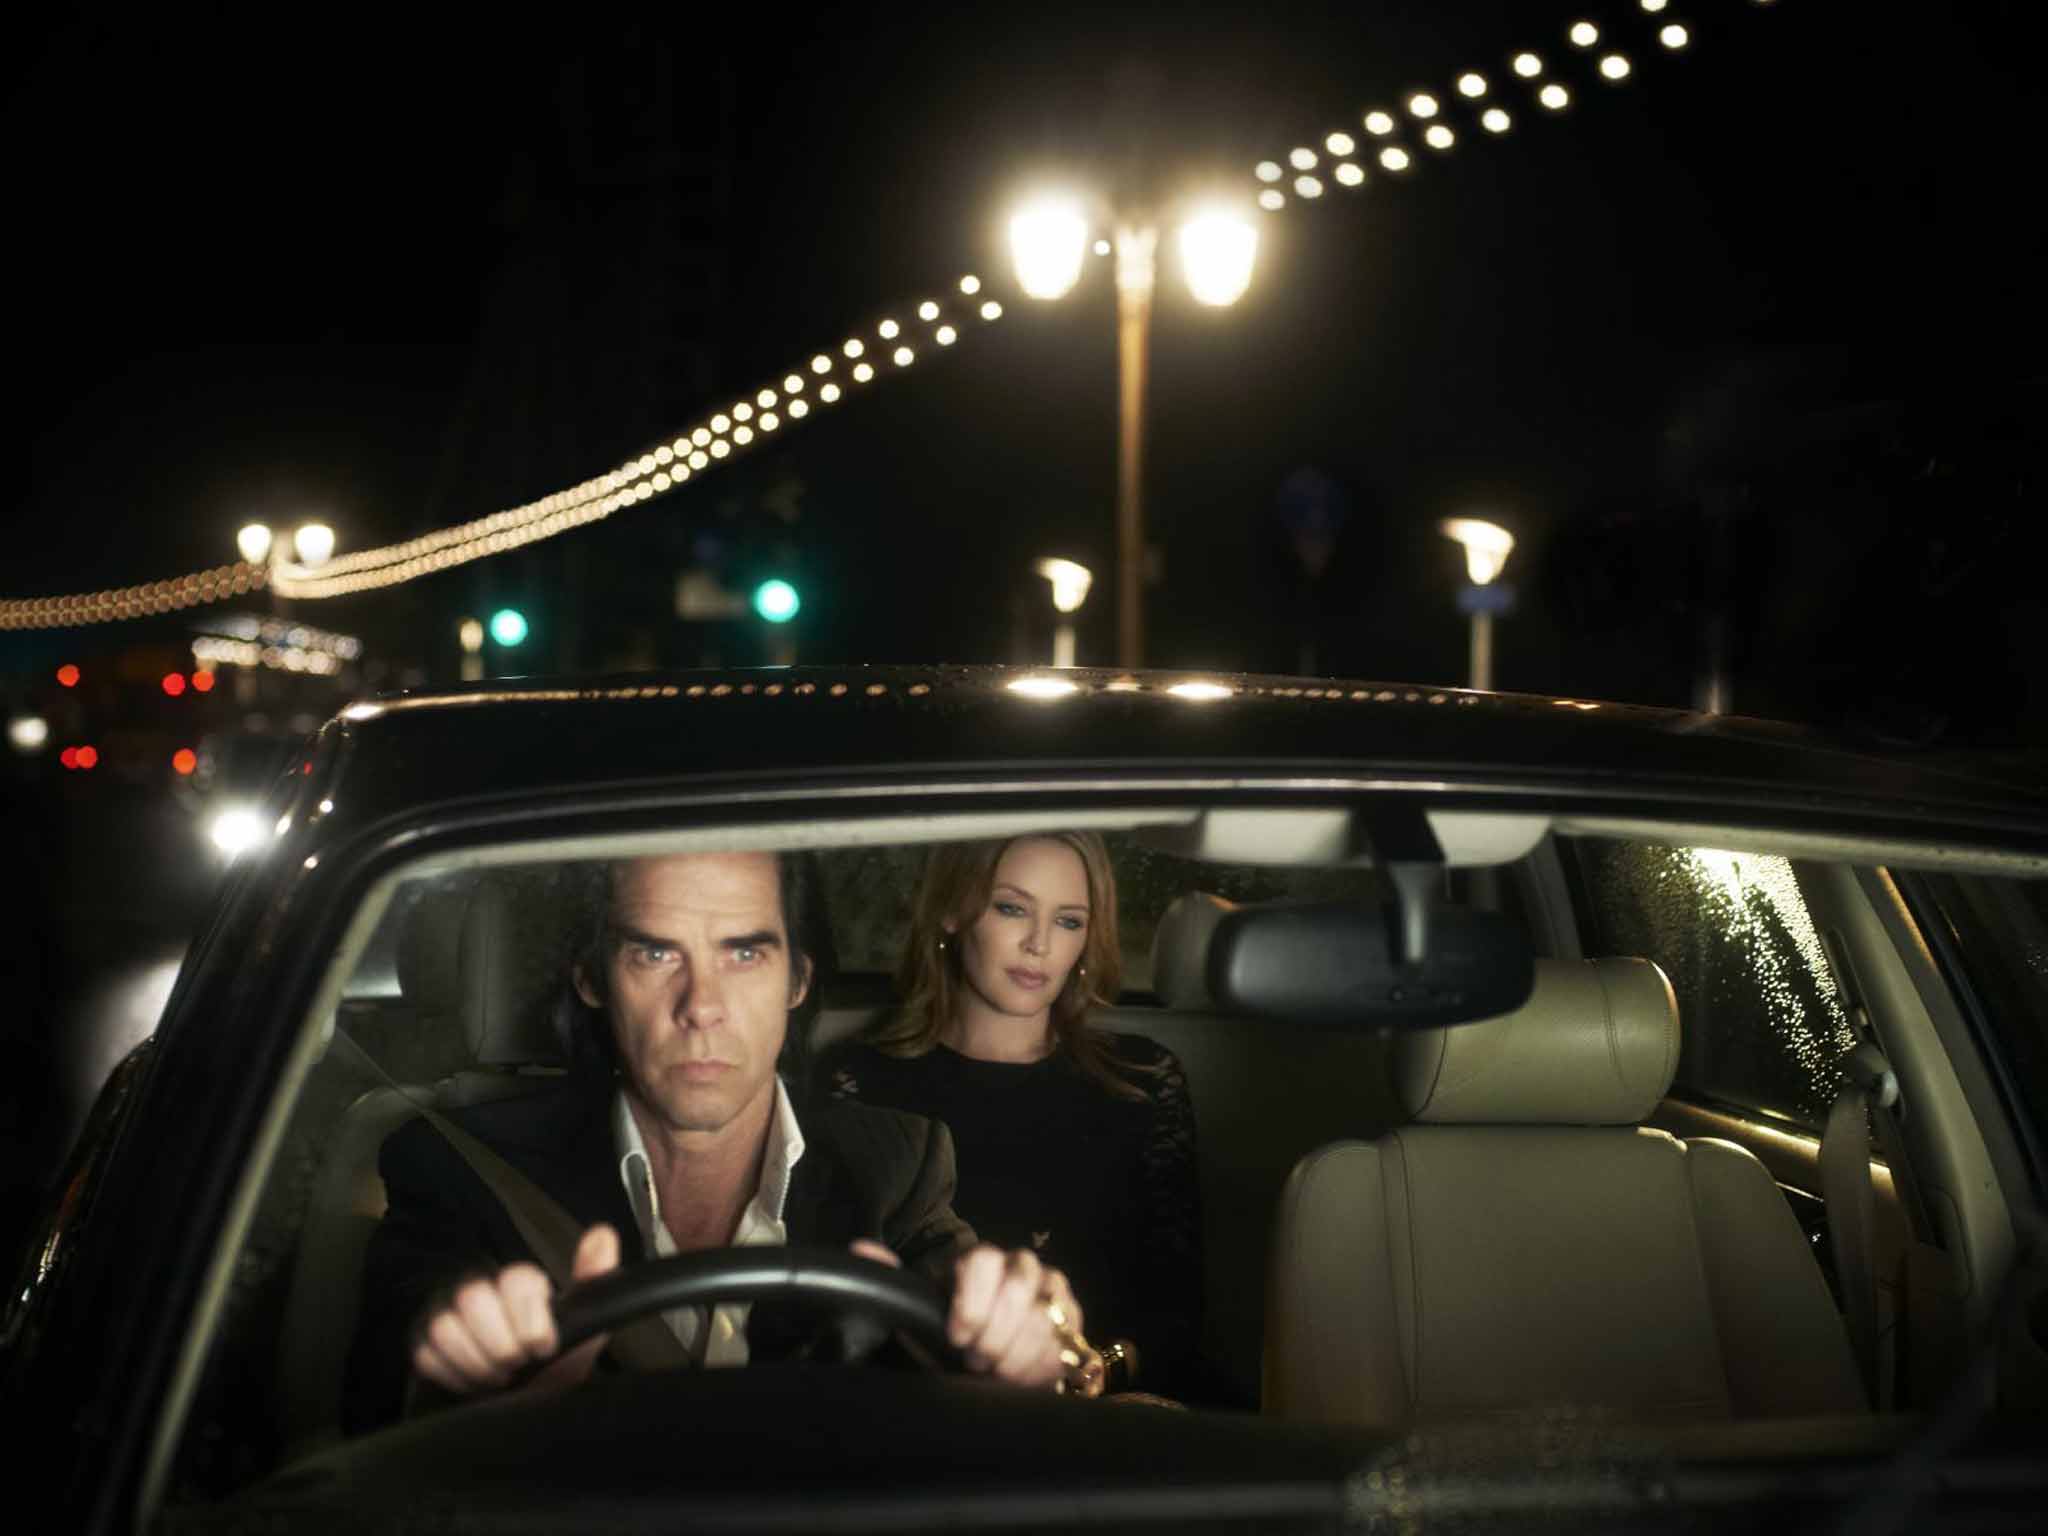 Night riders: Nick Cave and Kylie Minogue in '20,000 Days on Earth'